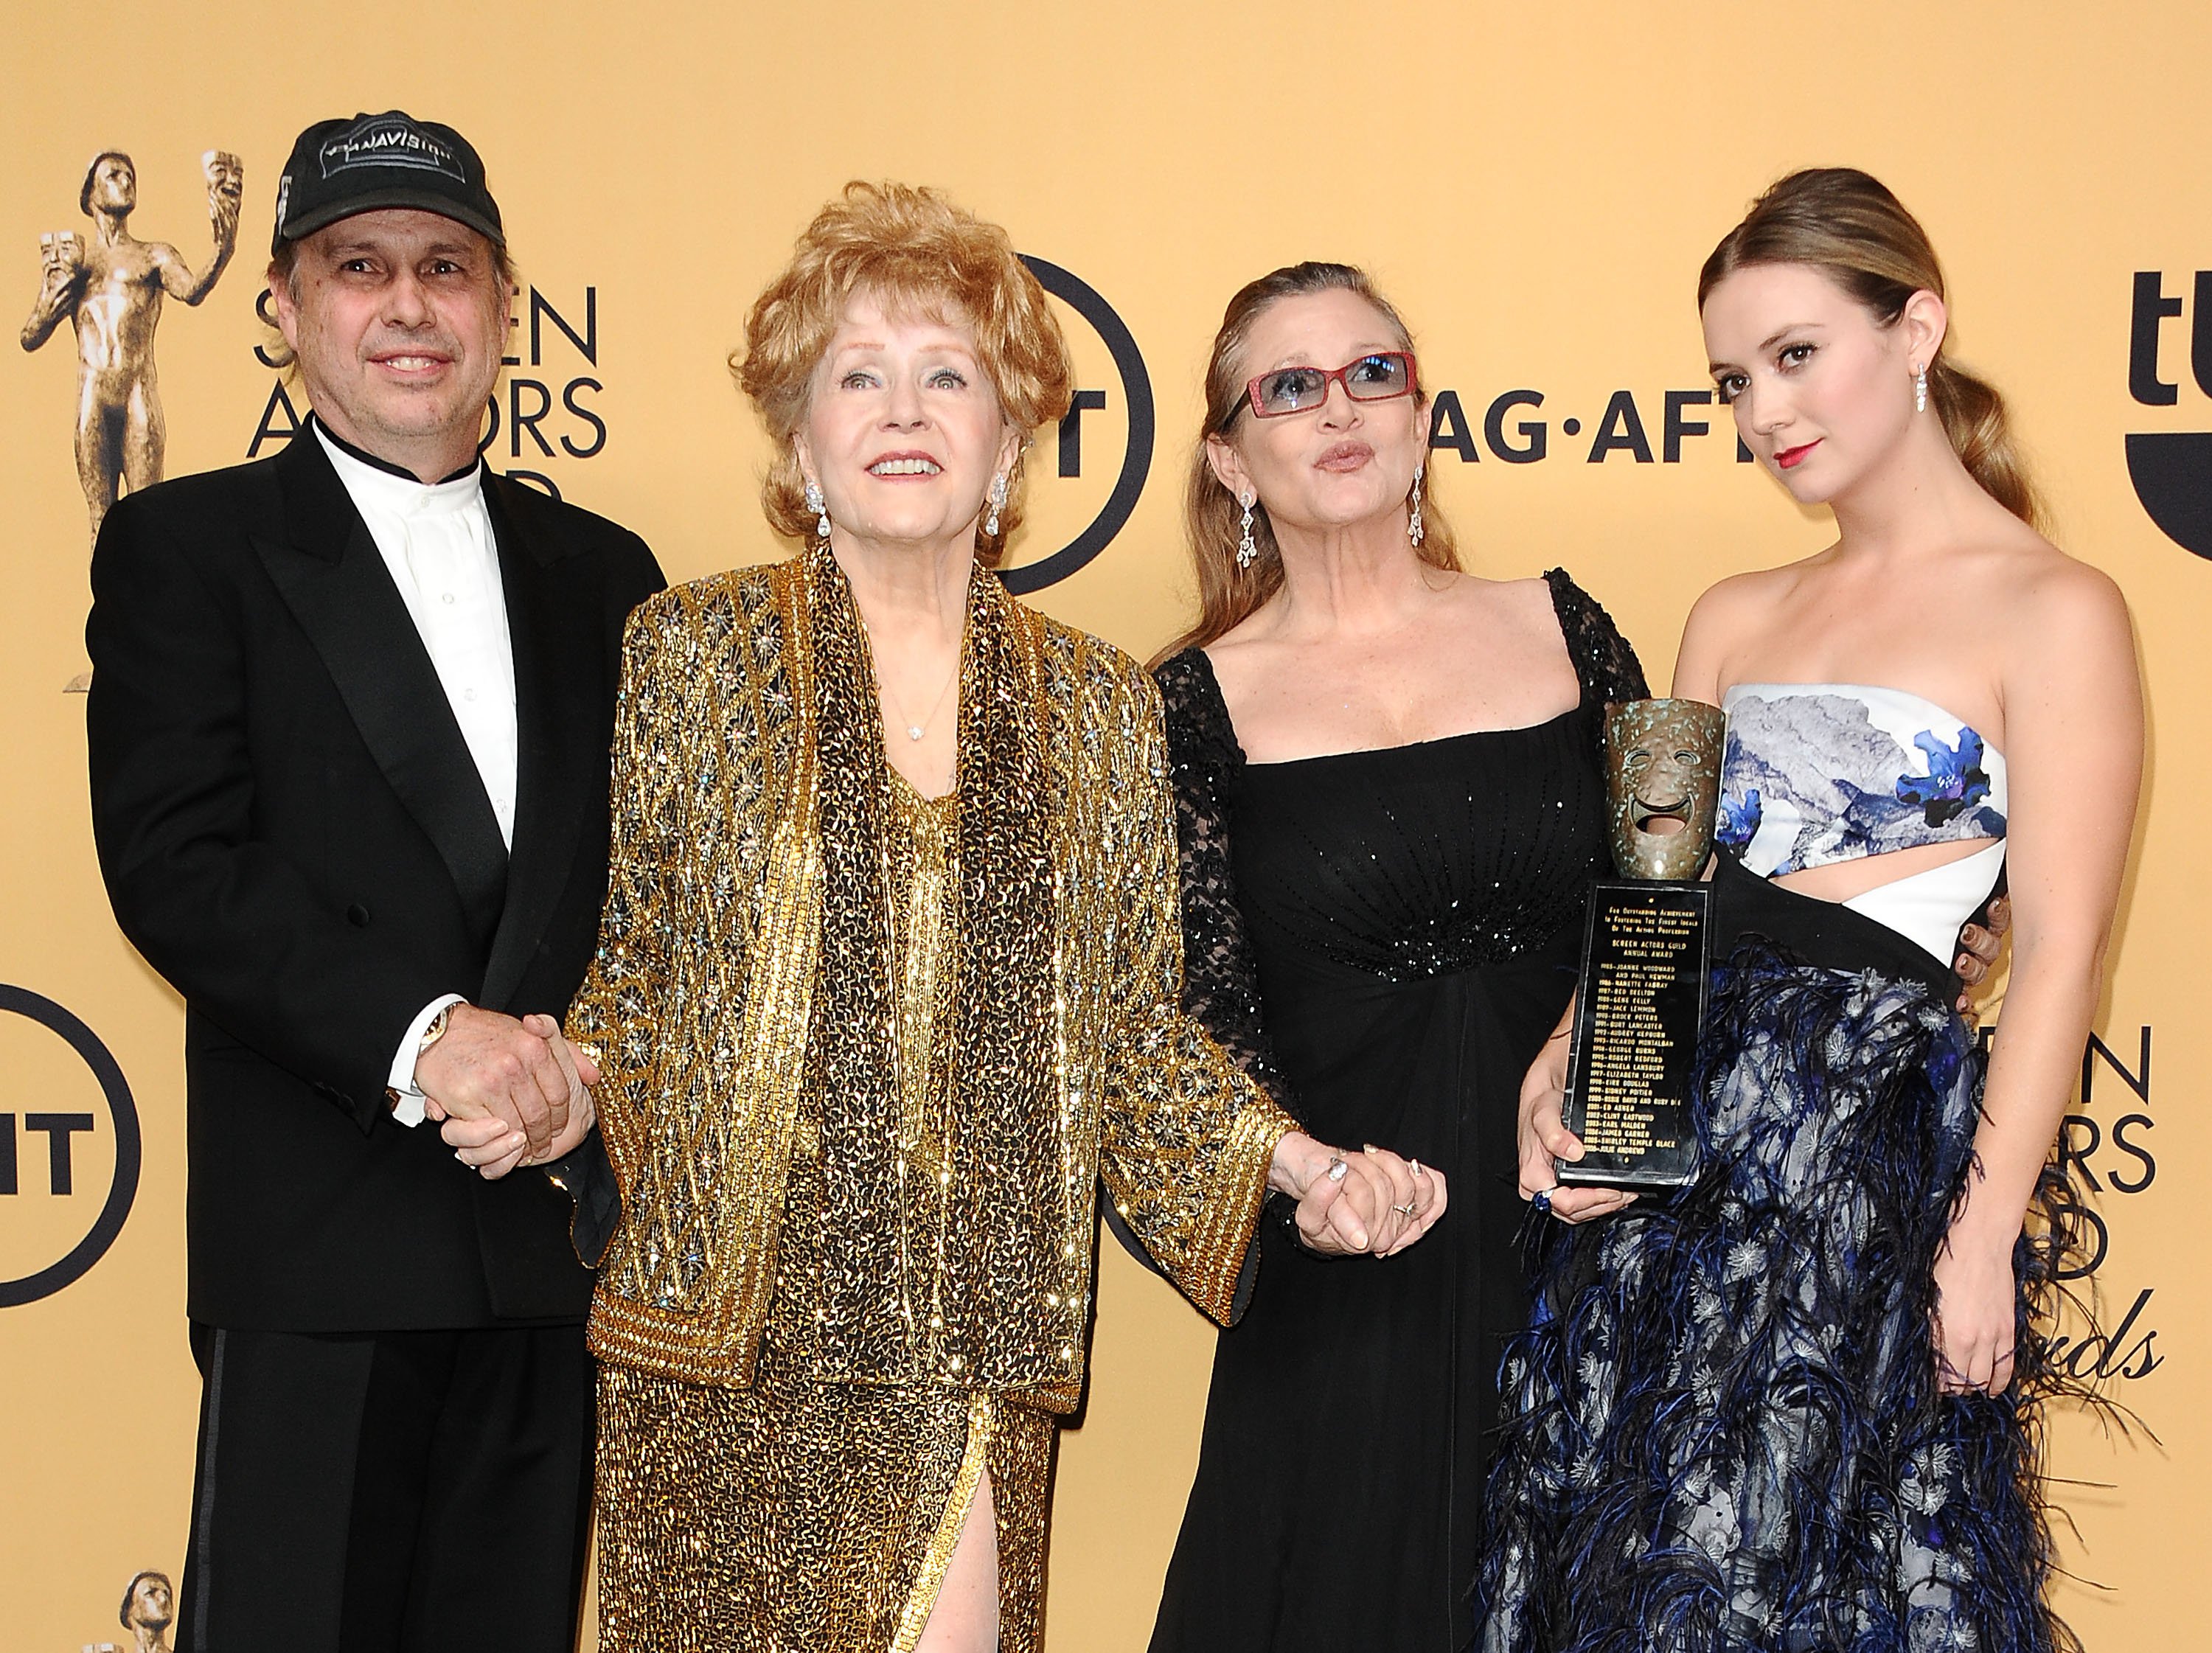 Todd Fisher, Debbie Reynolds Carrie Fisher and Billie Lourd pose in the press room at the 21st annual Screen Actors Guild Awards at The Shrine Auditorium on January 25, 2015 in Los Angeles, California  ┃Source: Getty Images